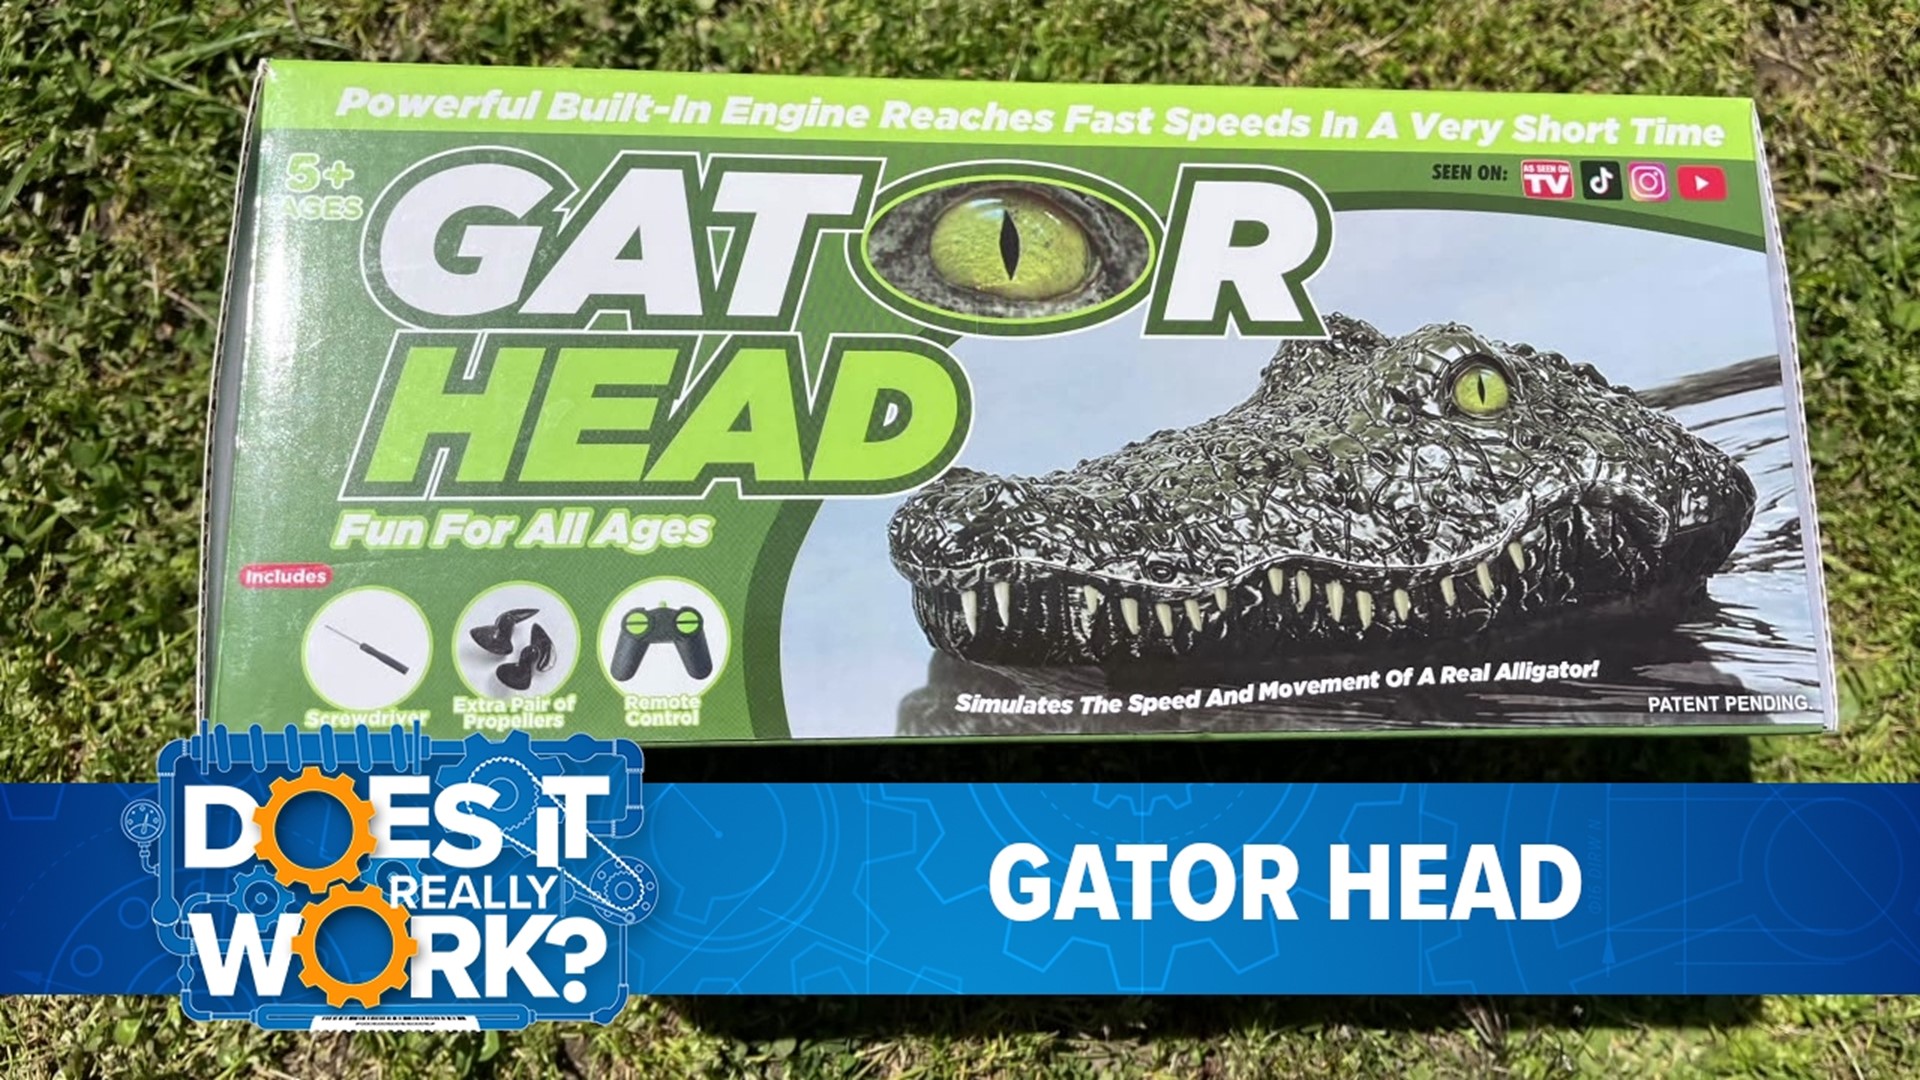 The maker claims this remote control gator simulates the movement and speed of a real alligator.